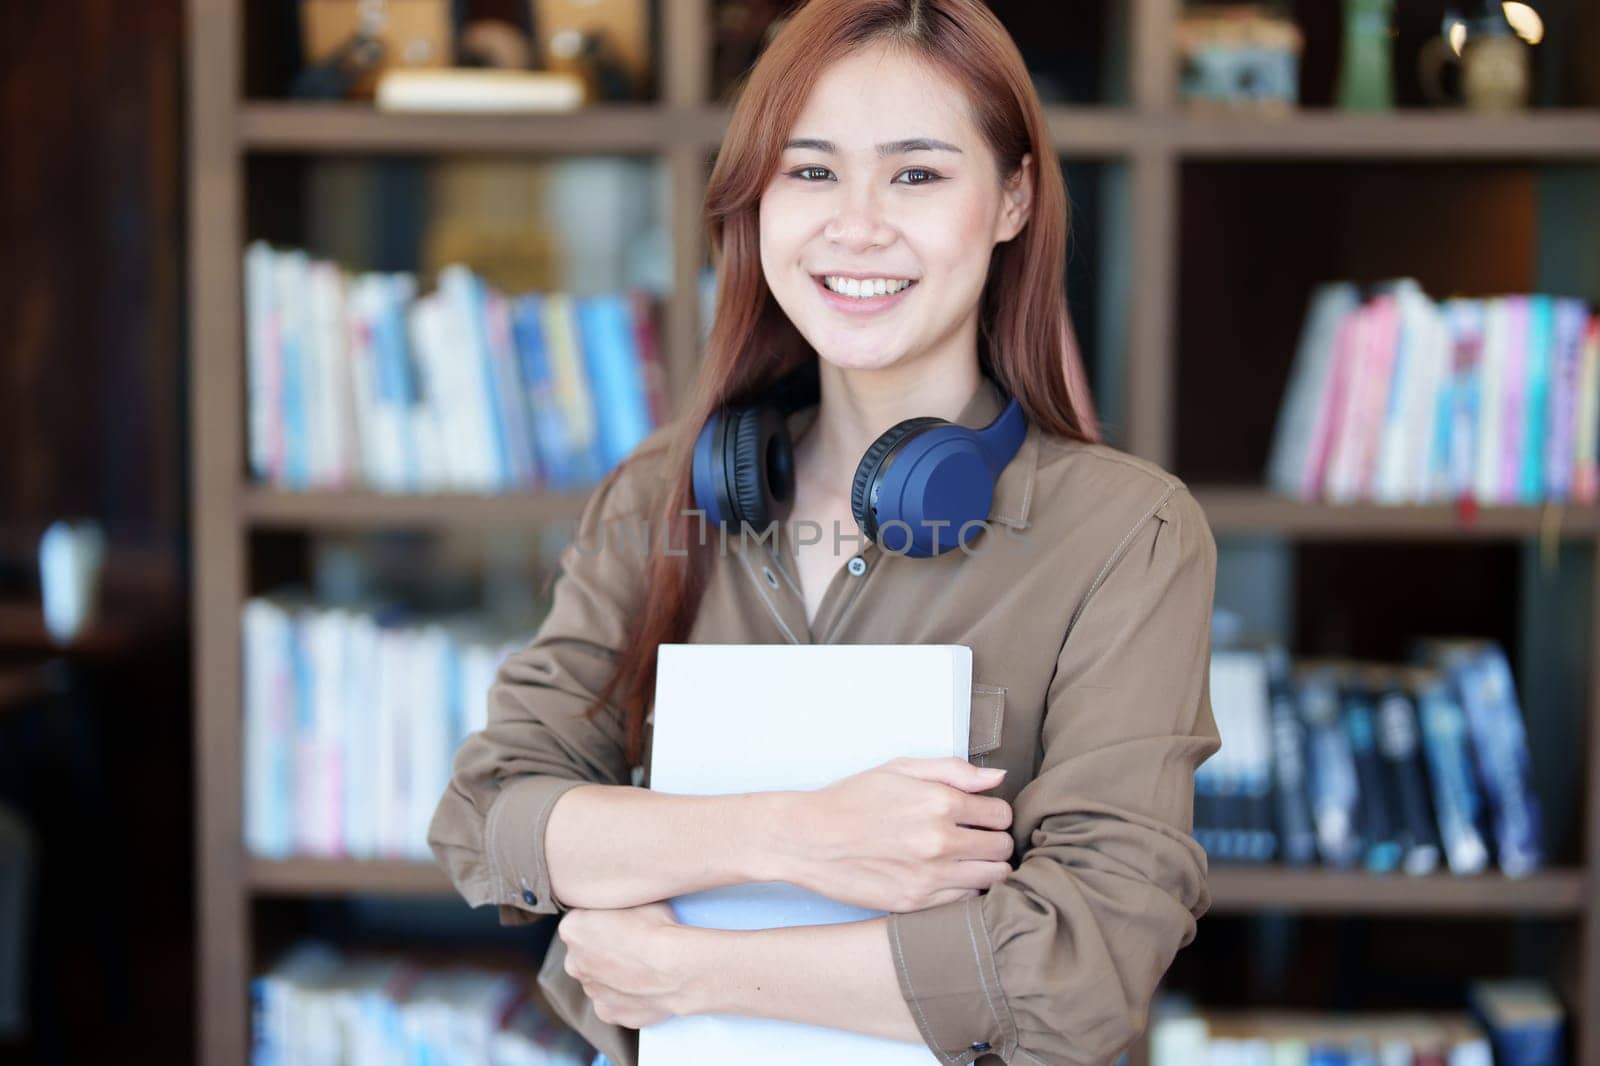 A portrait of a young Asian woman with a smiling face looking for a textbook in the library.